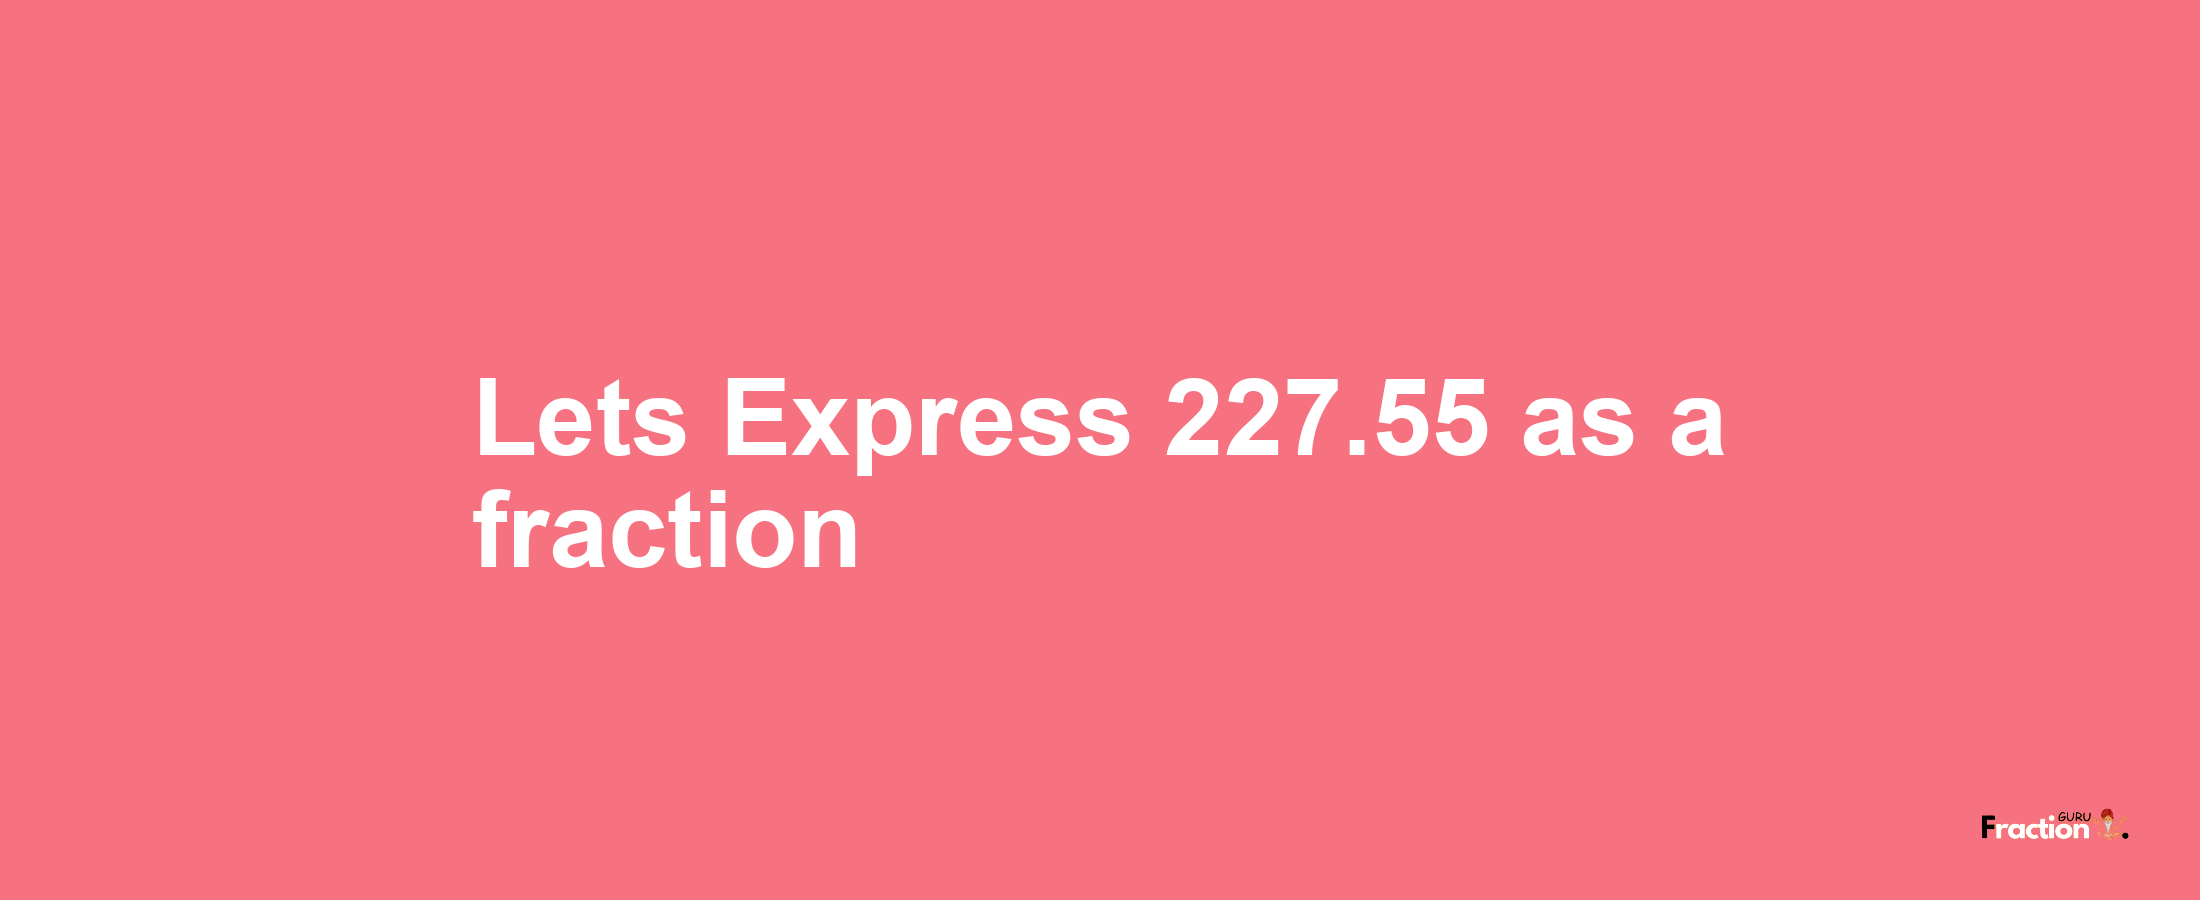 Lets Express 227.55 as afraction